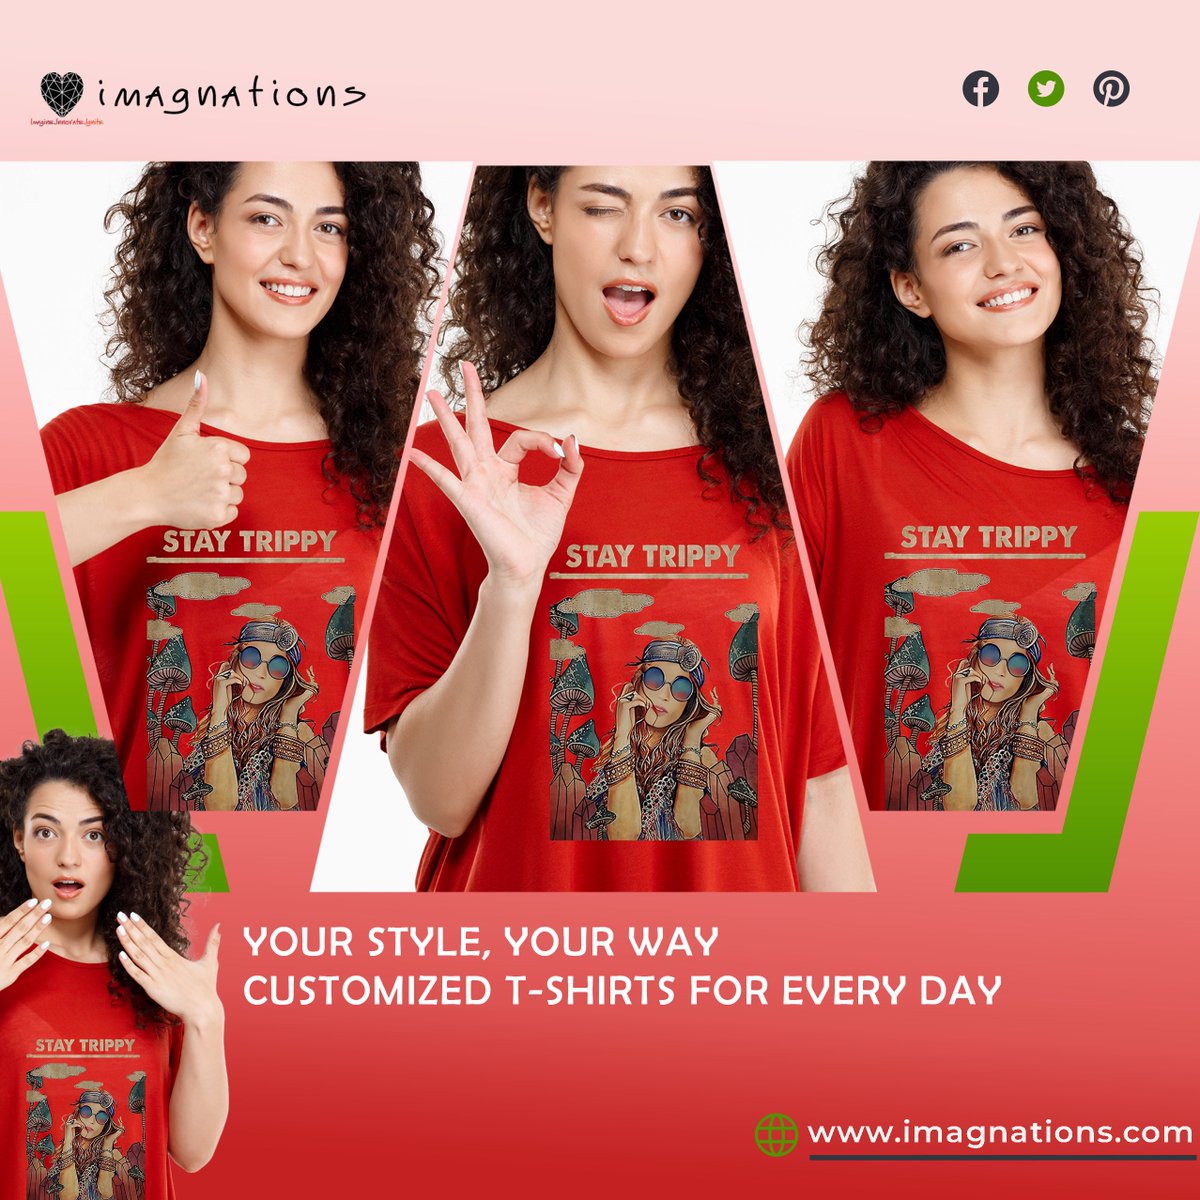 Your Style, Your Creation! Customize your dream look with our personalized collection. #CustomTees #ExpressYourself #UniquelyYou #imagnations #imaginations #CustomizeYourStyle #PersonalizedFashion #CreateYourLook #UniqueDesigns #ExpressYourself #FashionCreativity #StyleStatement